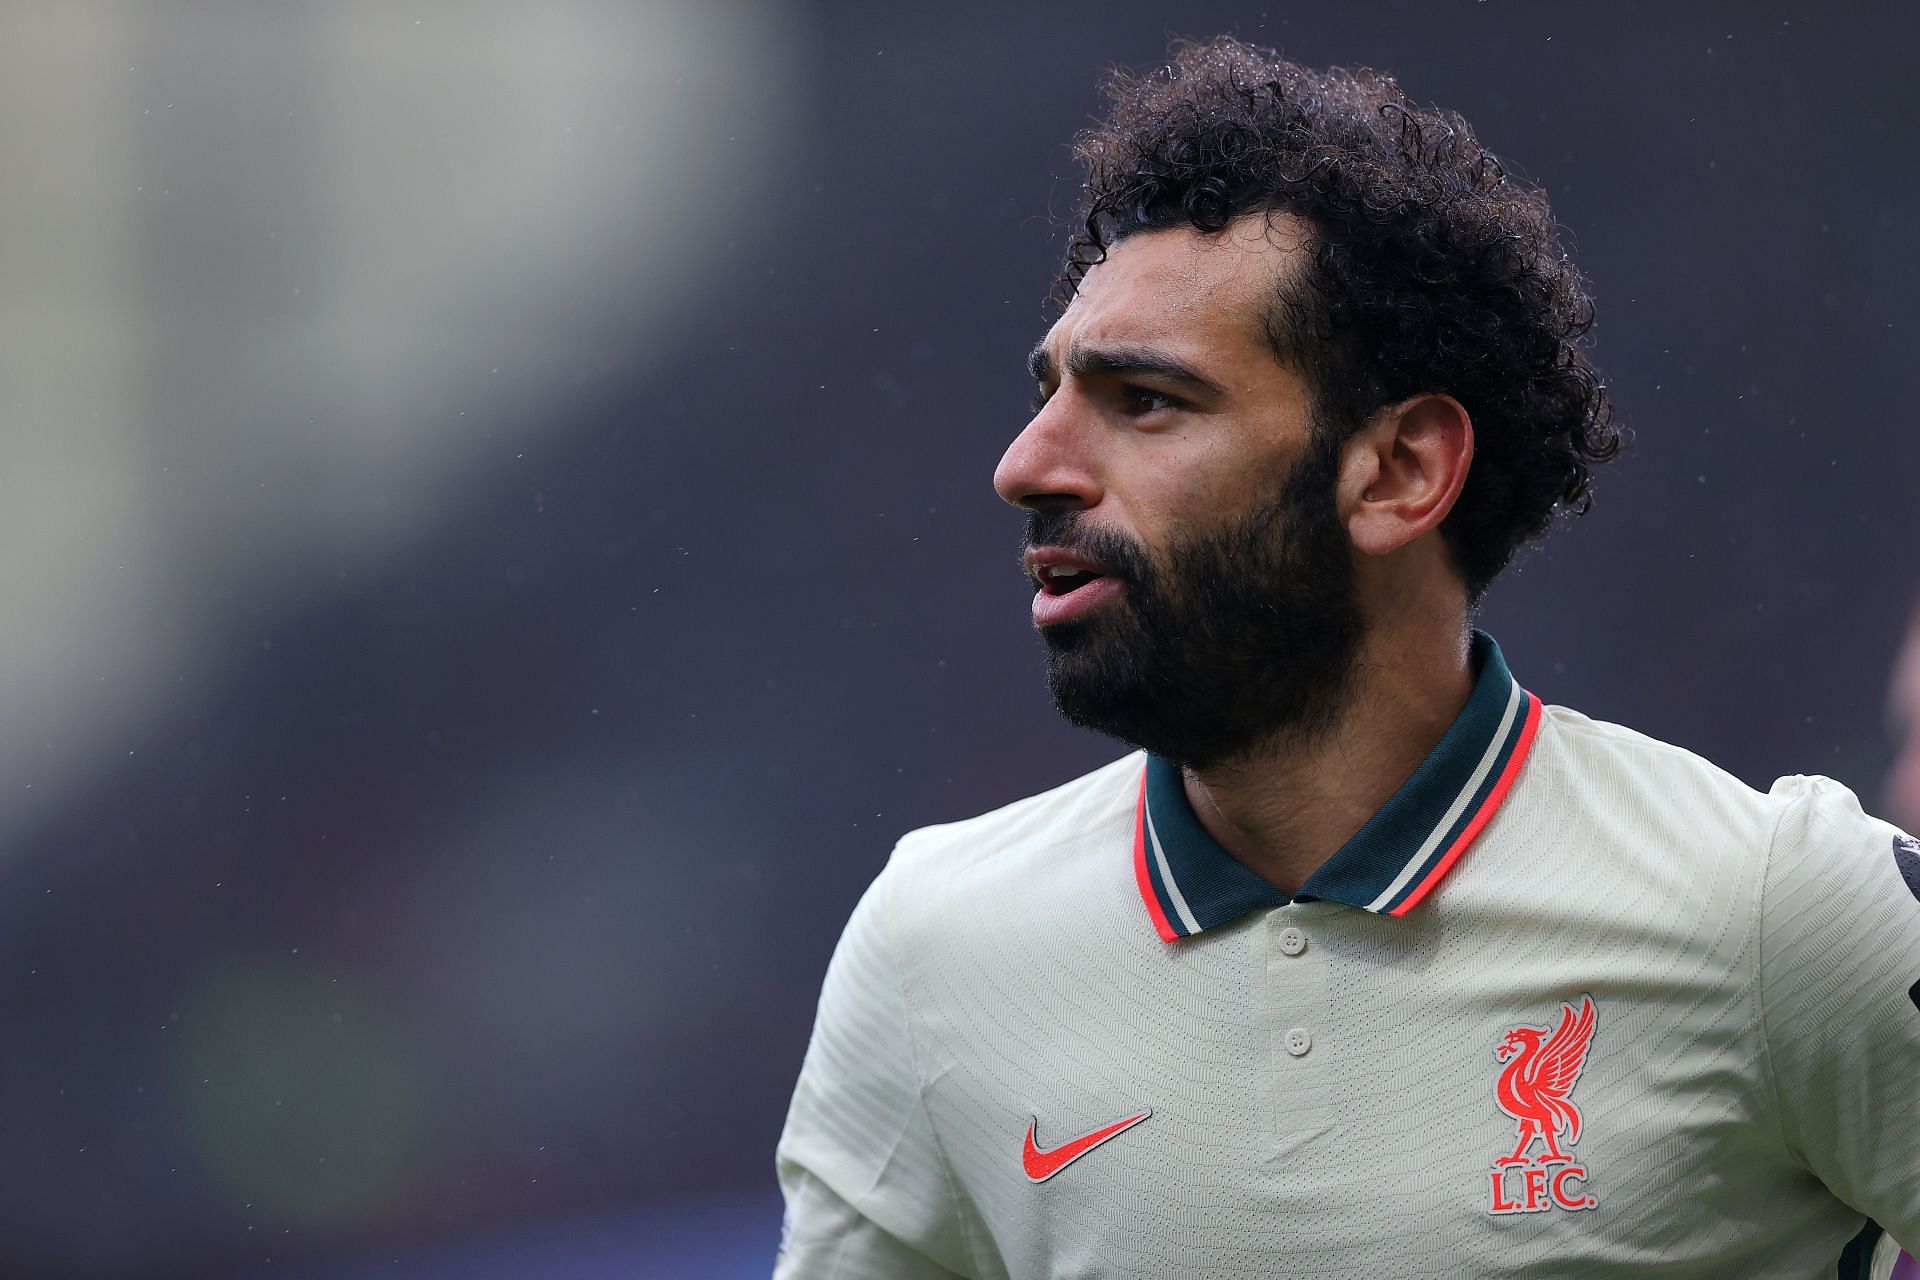 Mohamed Salah has shown a tendency to come up with good performances in big games